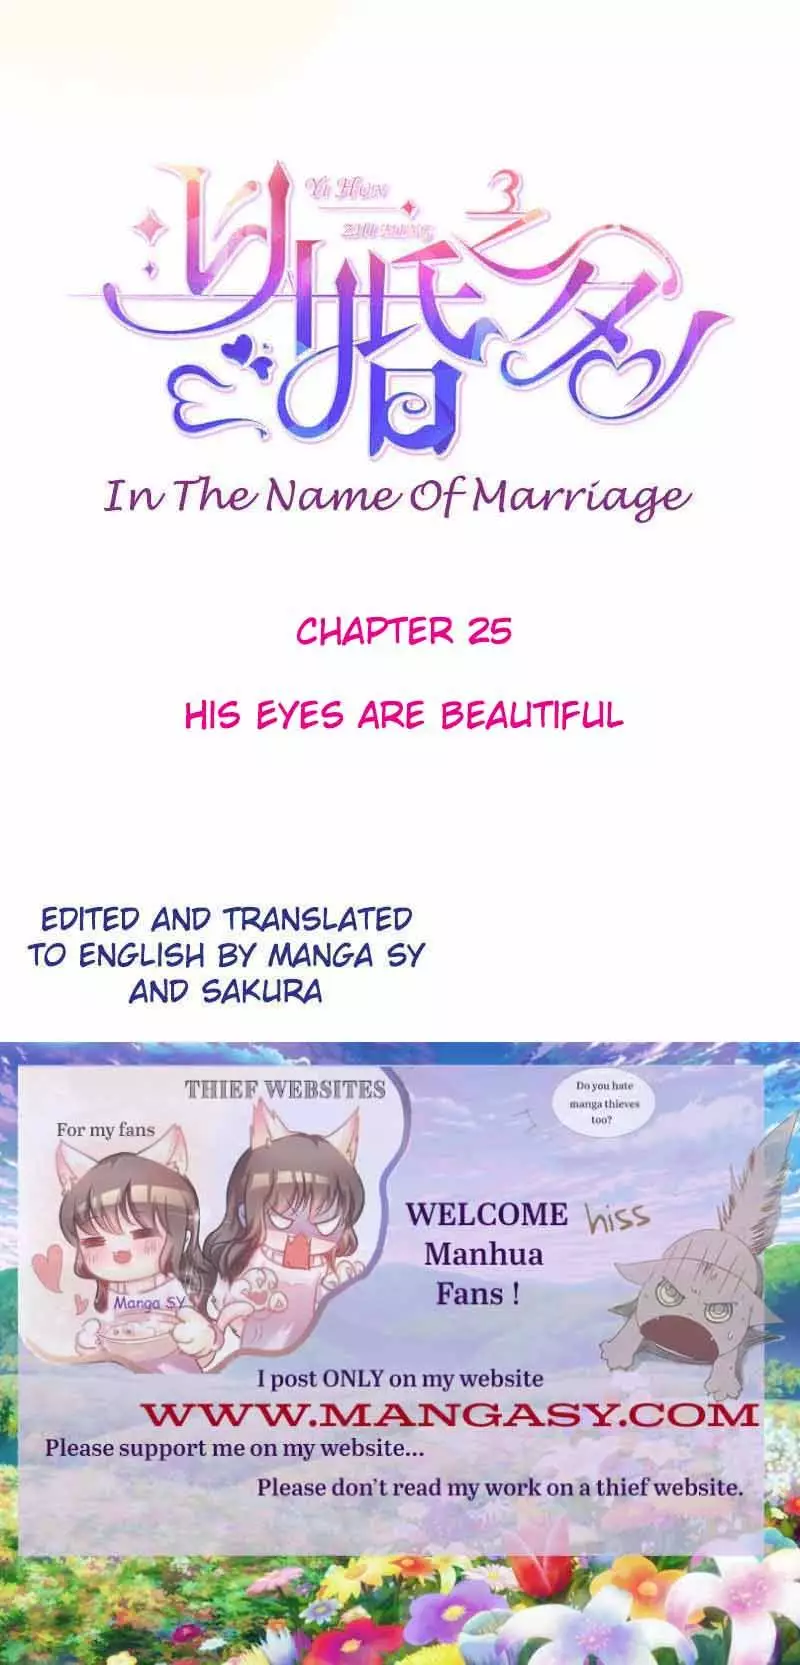 In The Name Of Marriage - 25 page 1-0de6f41c